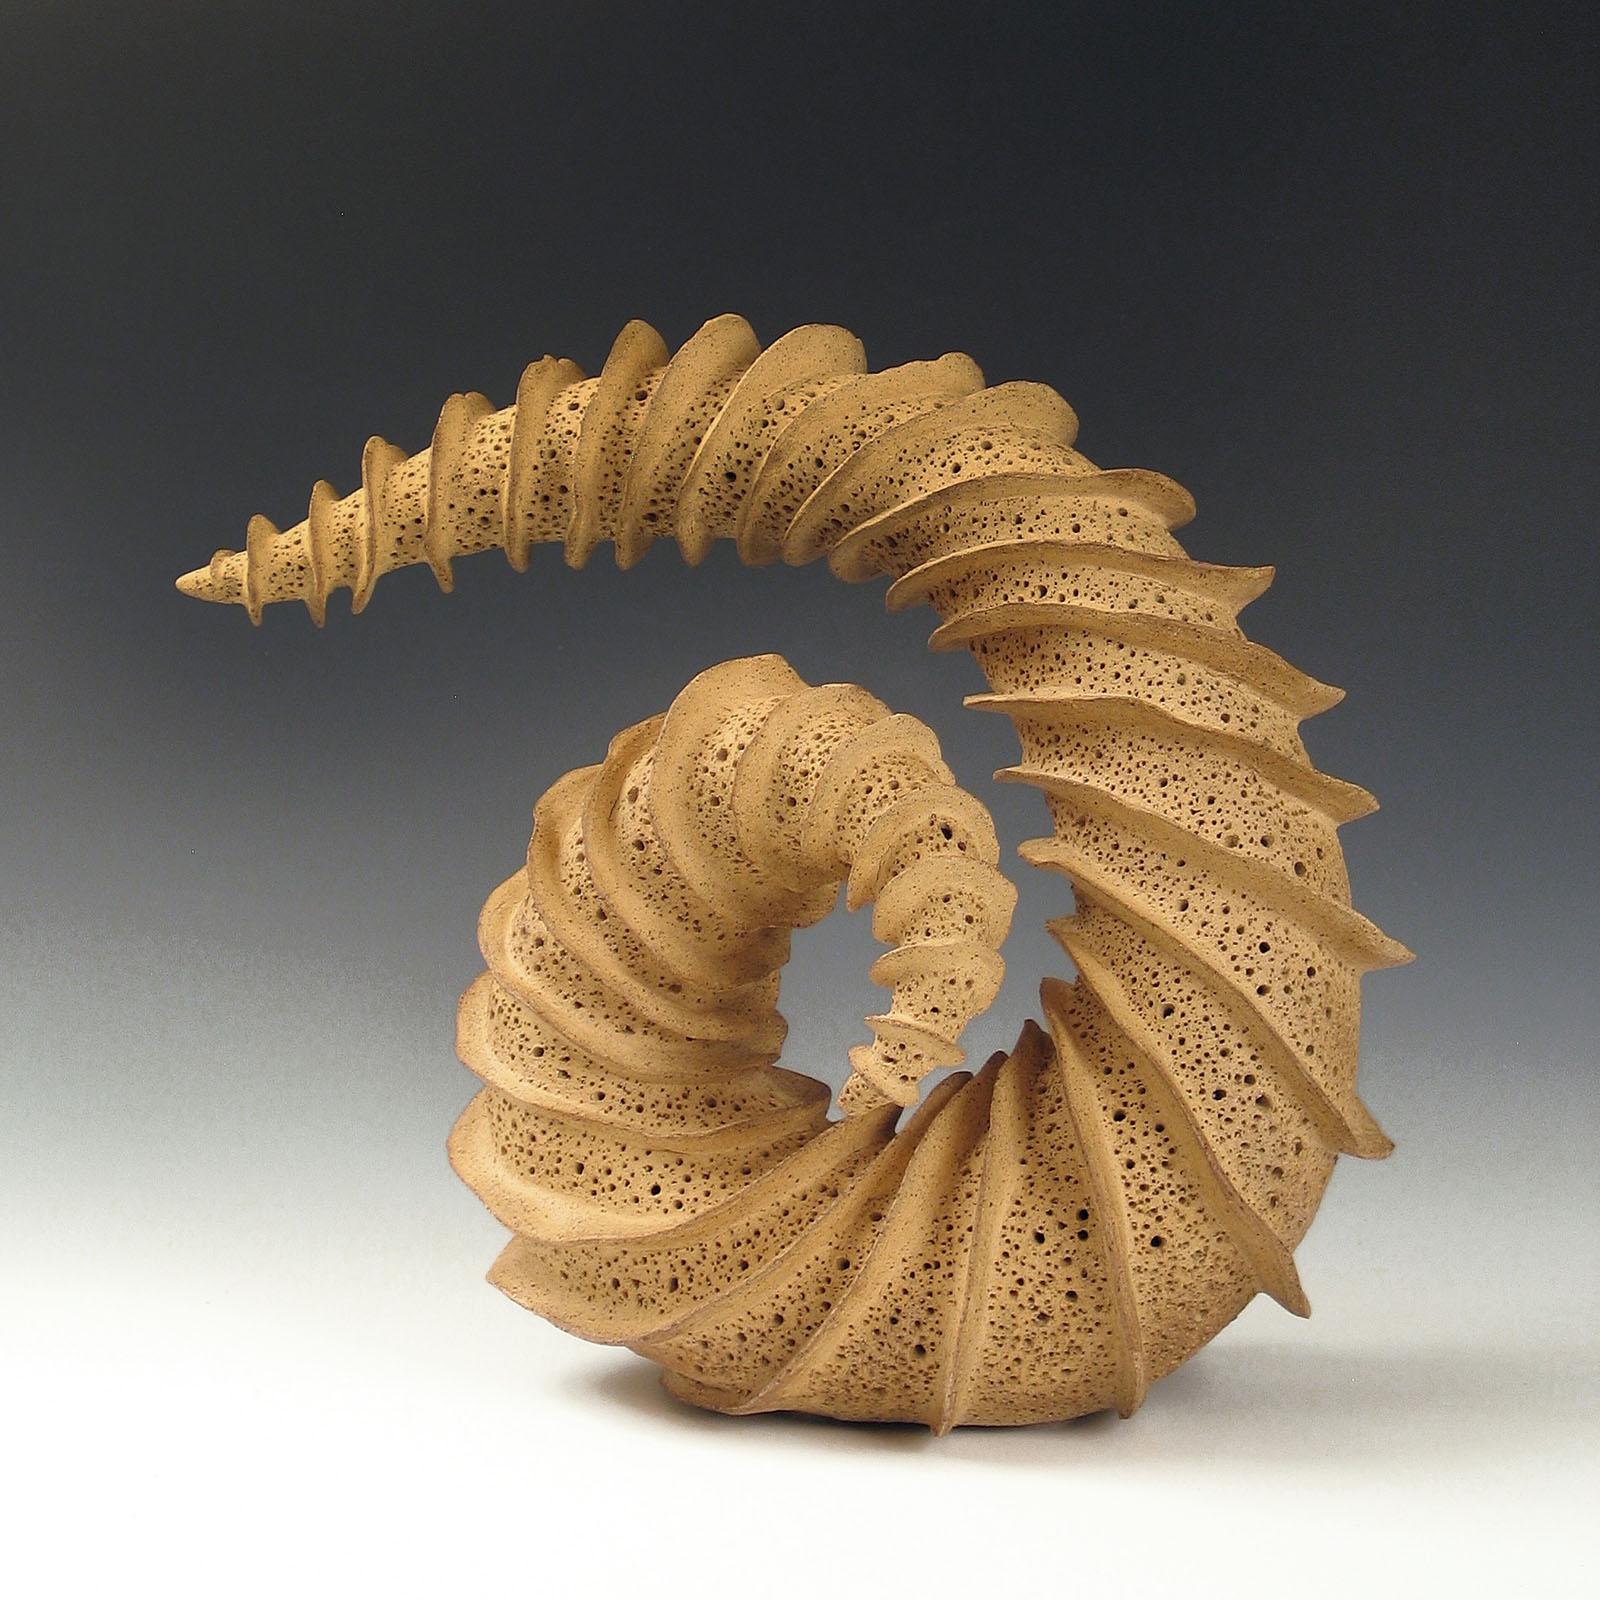  “Looking Back” radiates fins spiraling around a tapering coiled ceramic form. Always looking for new materials and methods, the artist has made sculpture in such diverse materials as wood, metal, concrete, encaustic and ceramic, maintaining a view